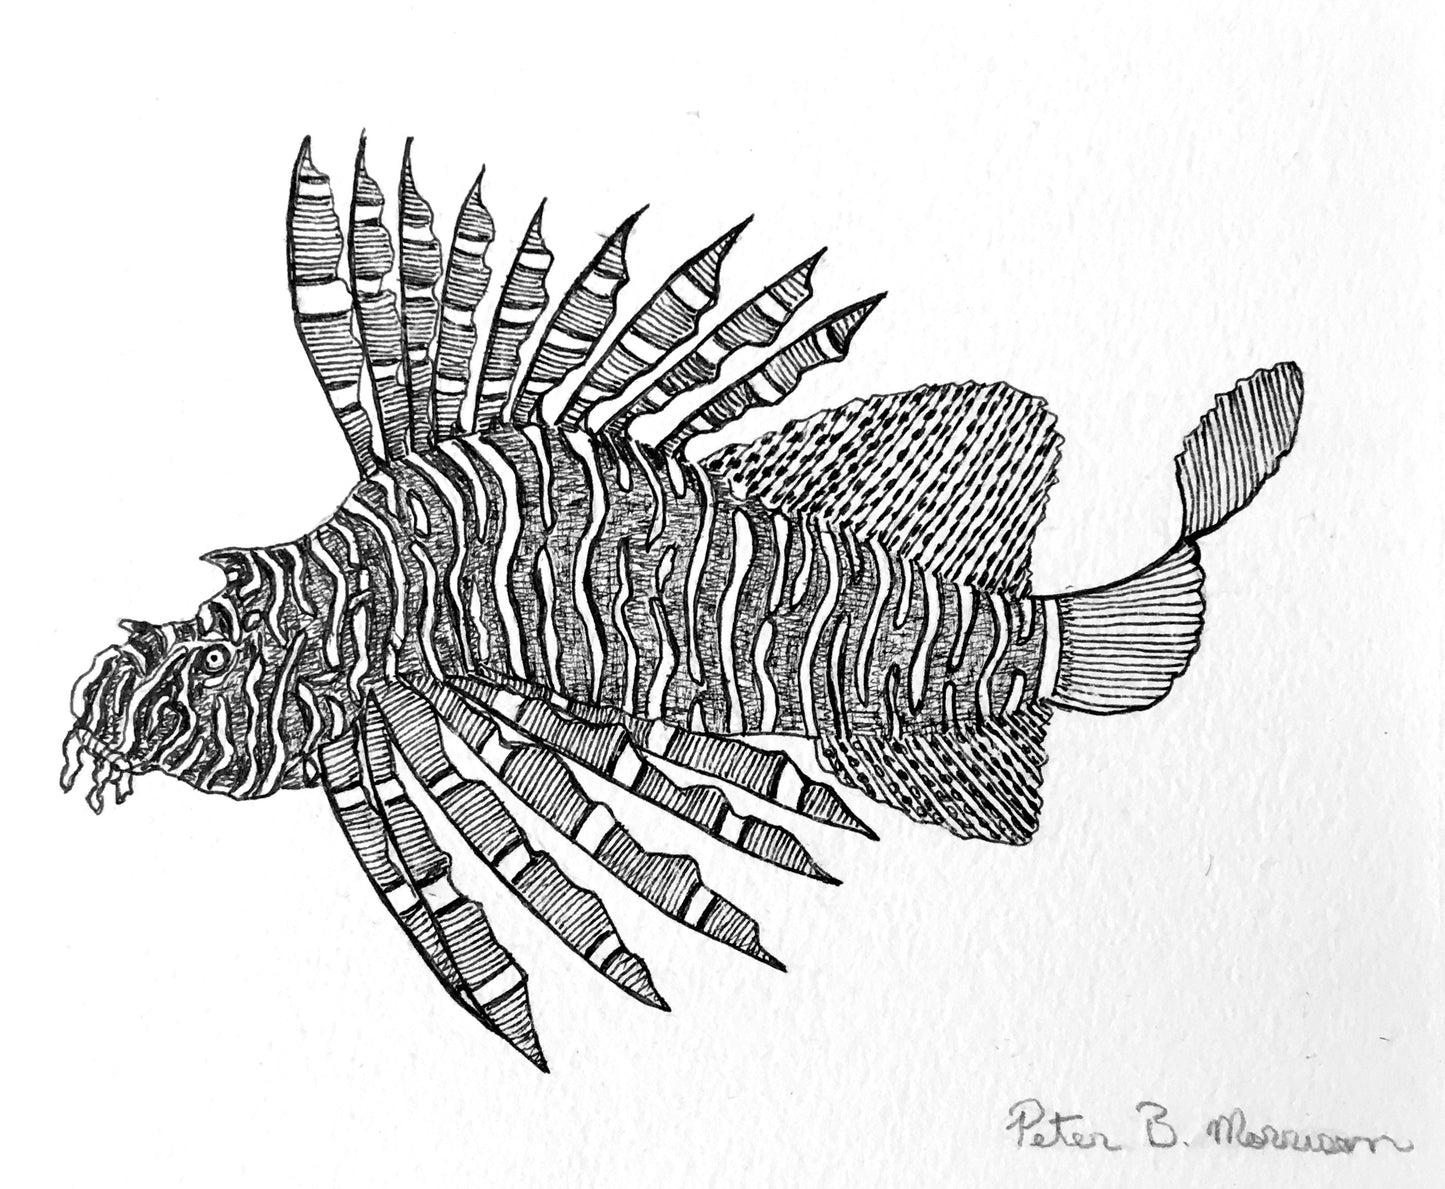 PETER B MORRISON | 'Awgad wapil  (Lion Fish)' Drawing | Pen and ink on archival paper